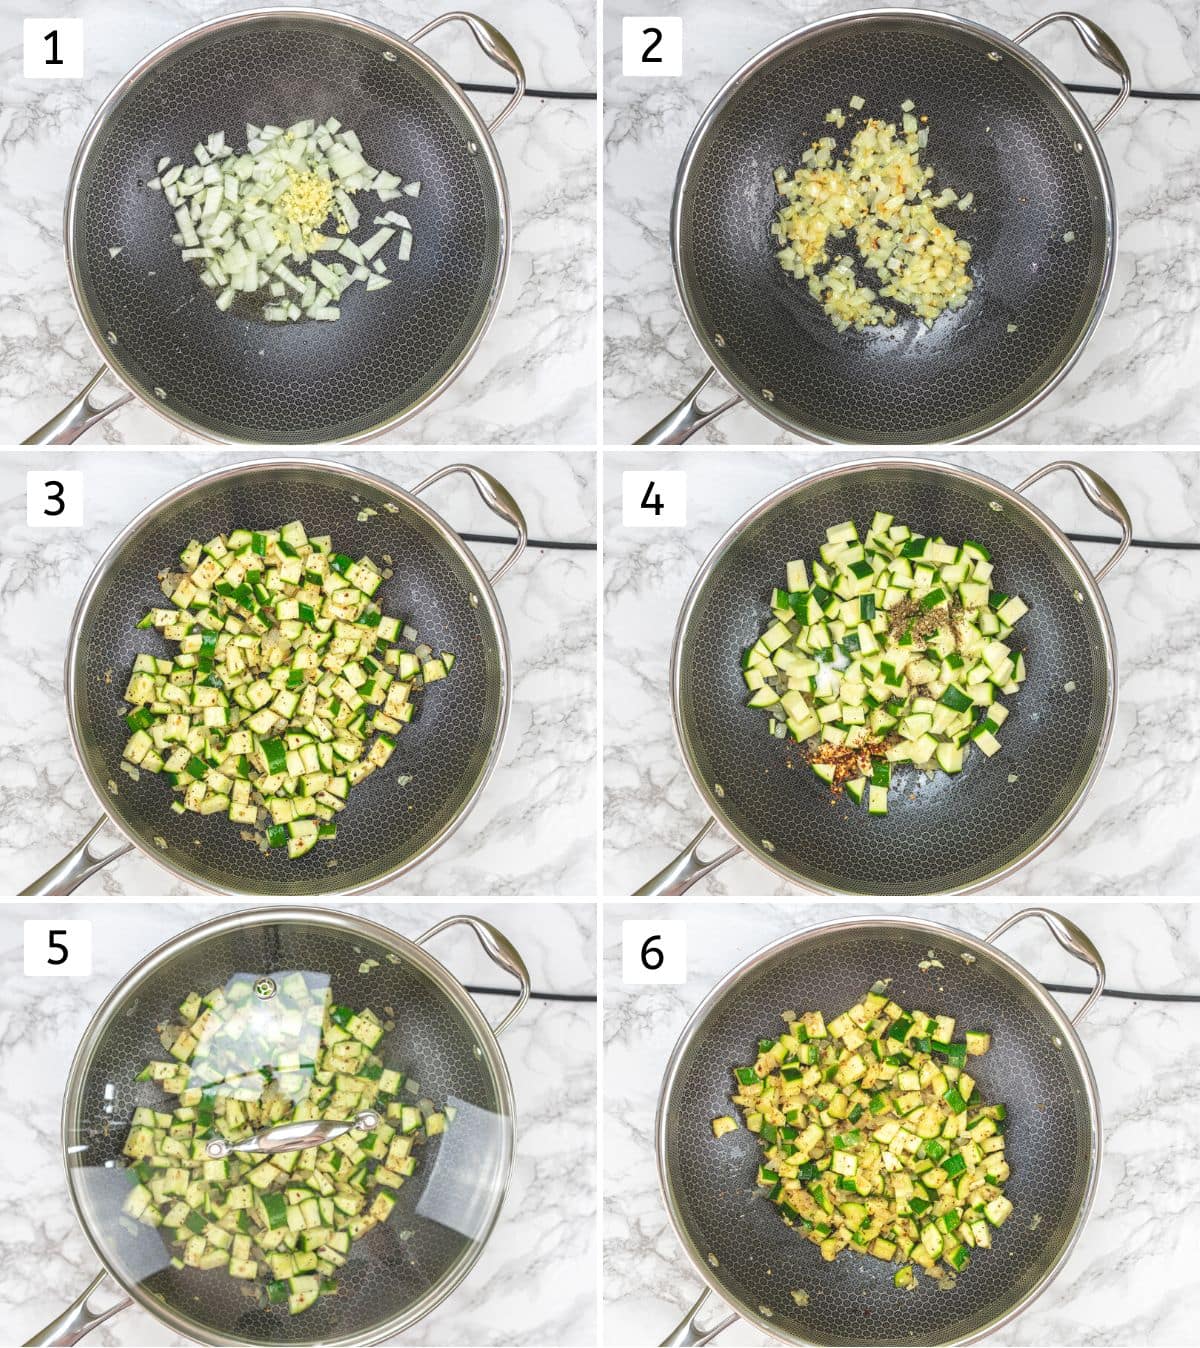 Collage of 6 images showing cooking onion and zucchini in a pan with a lid on.